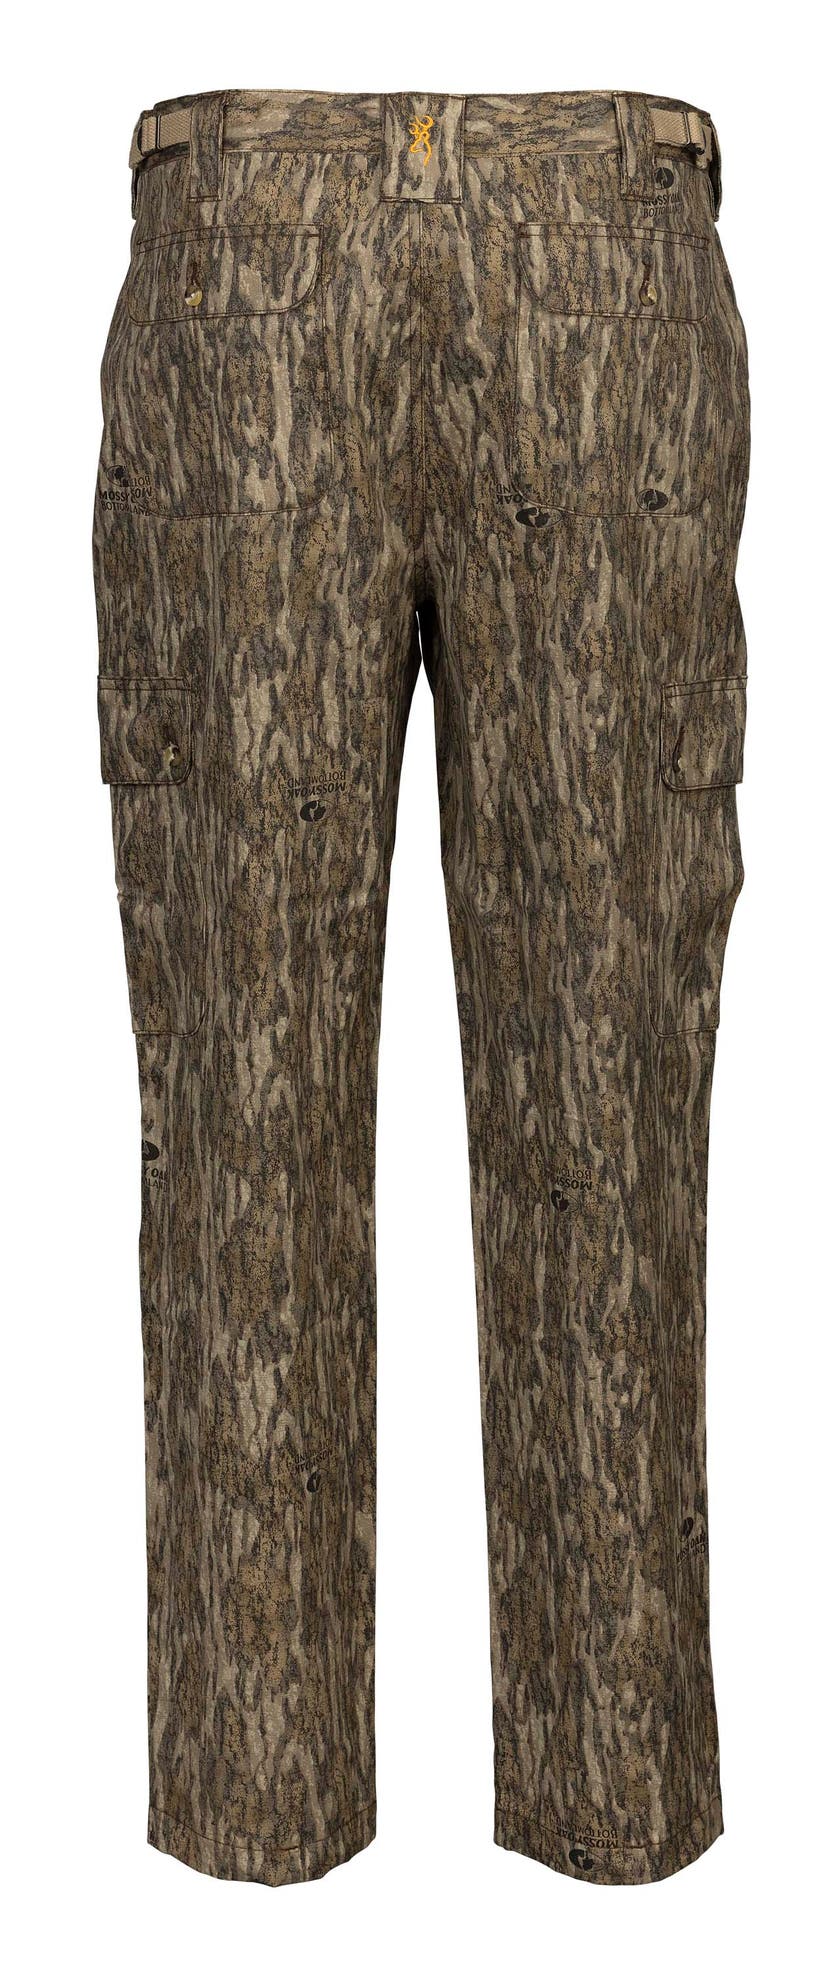 Wasatch Pant